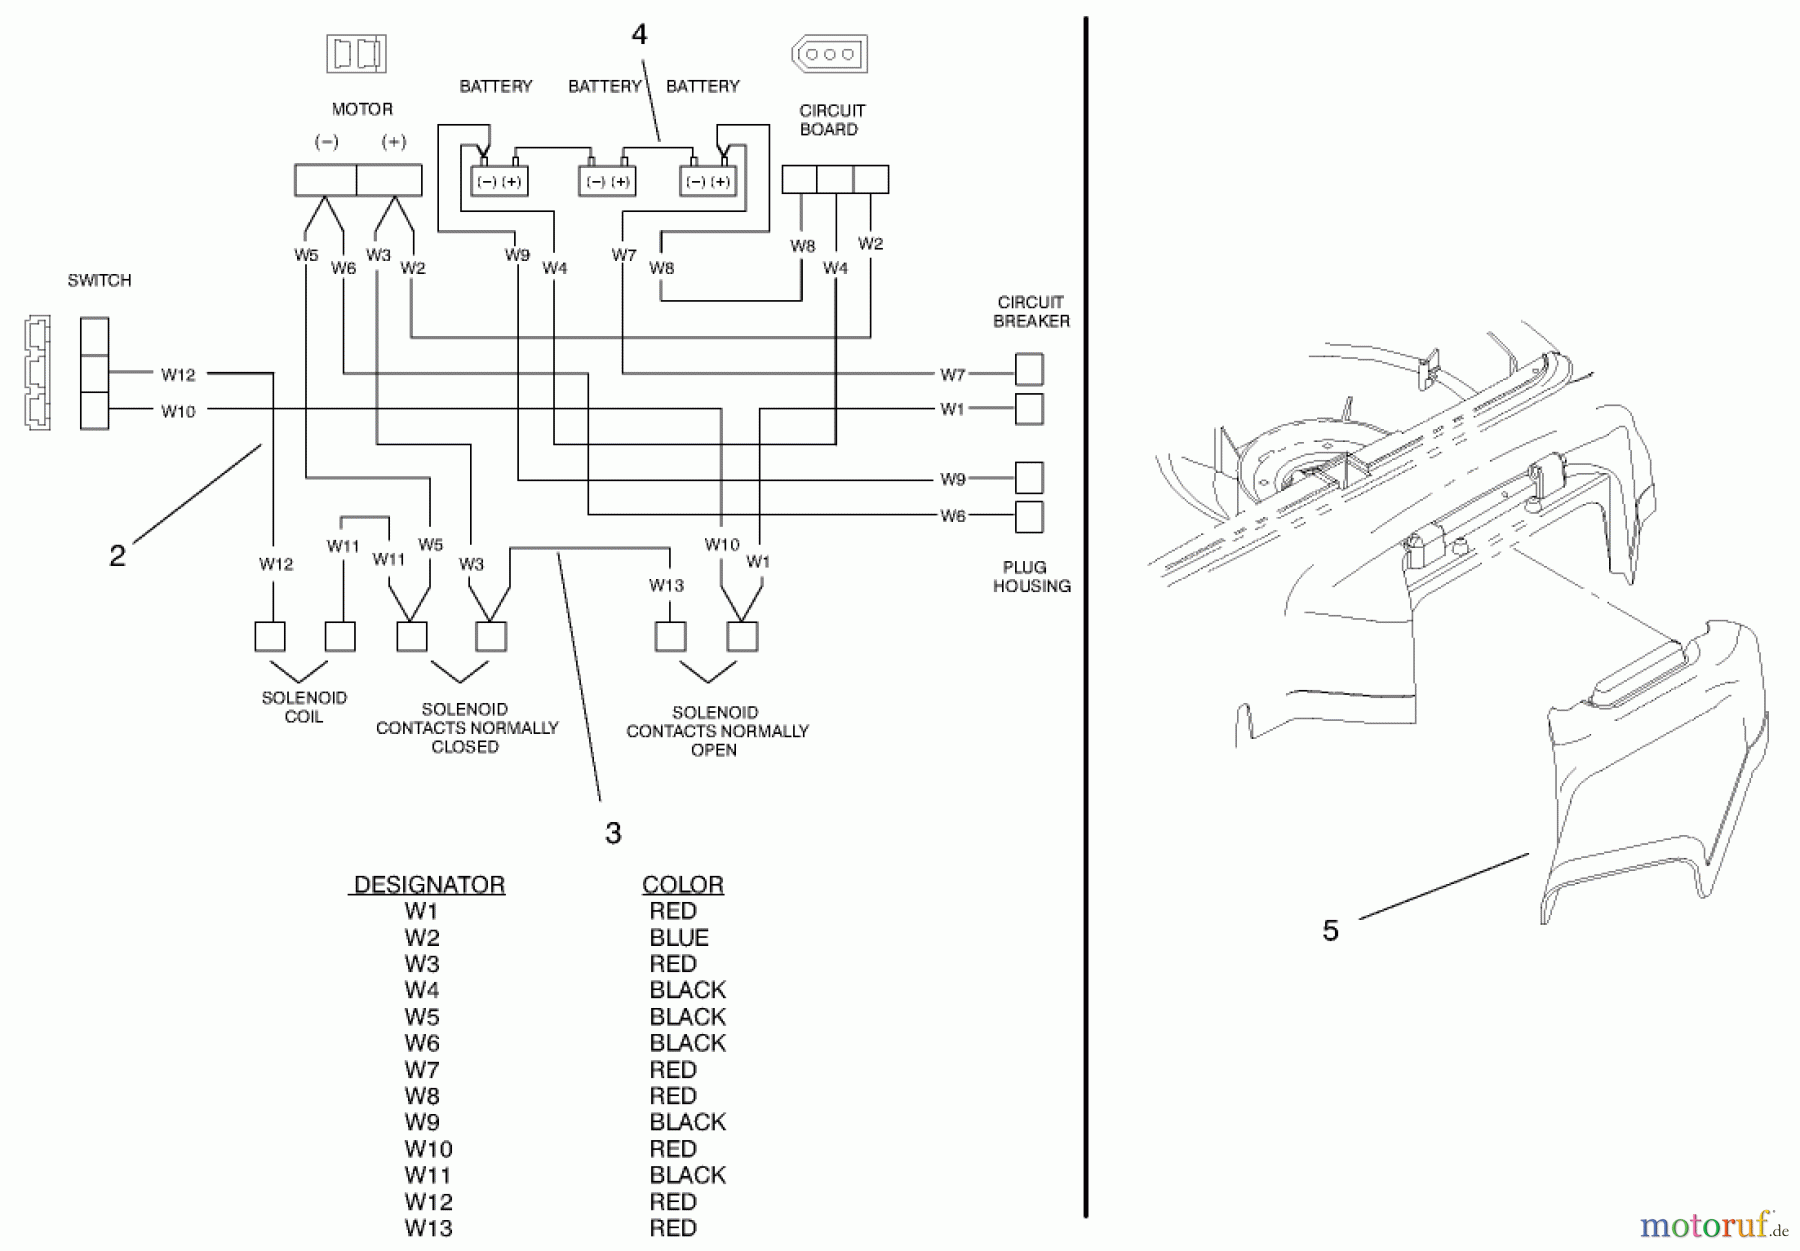  Toro Neu Mowers, Electric 20649 - Toro Carefree Electric WPM, 36 VDC, 1997 (7900001-7999999) ELECTRICAL WIRING DIAGRAM AND SIDE DISCHARGE CHUTE